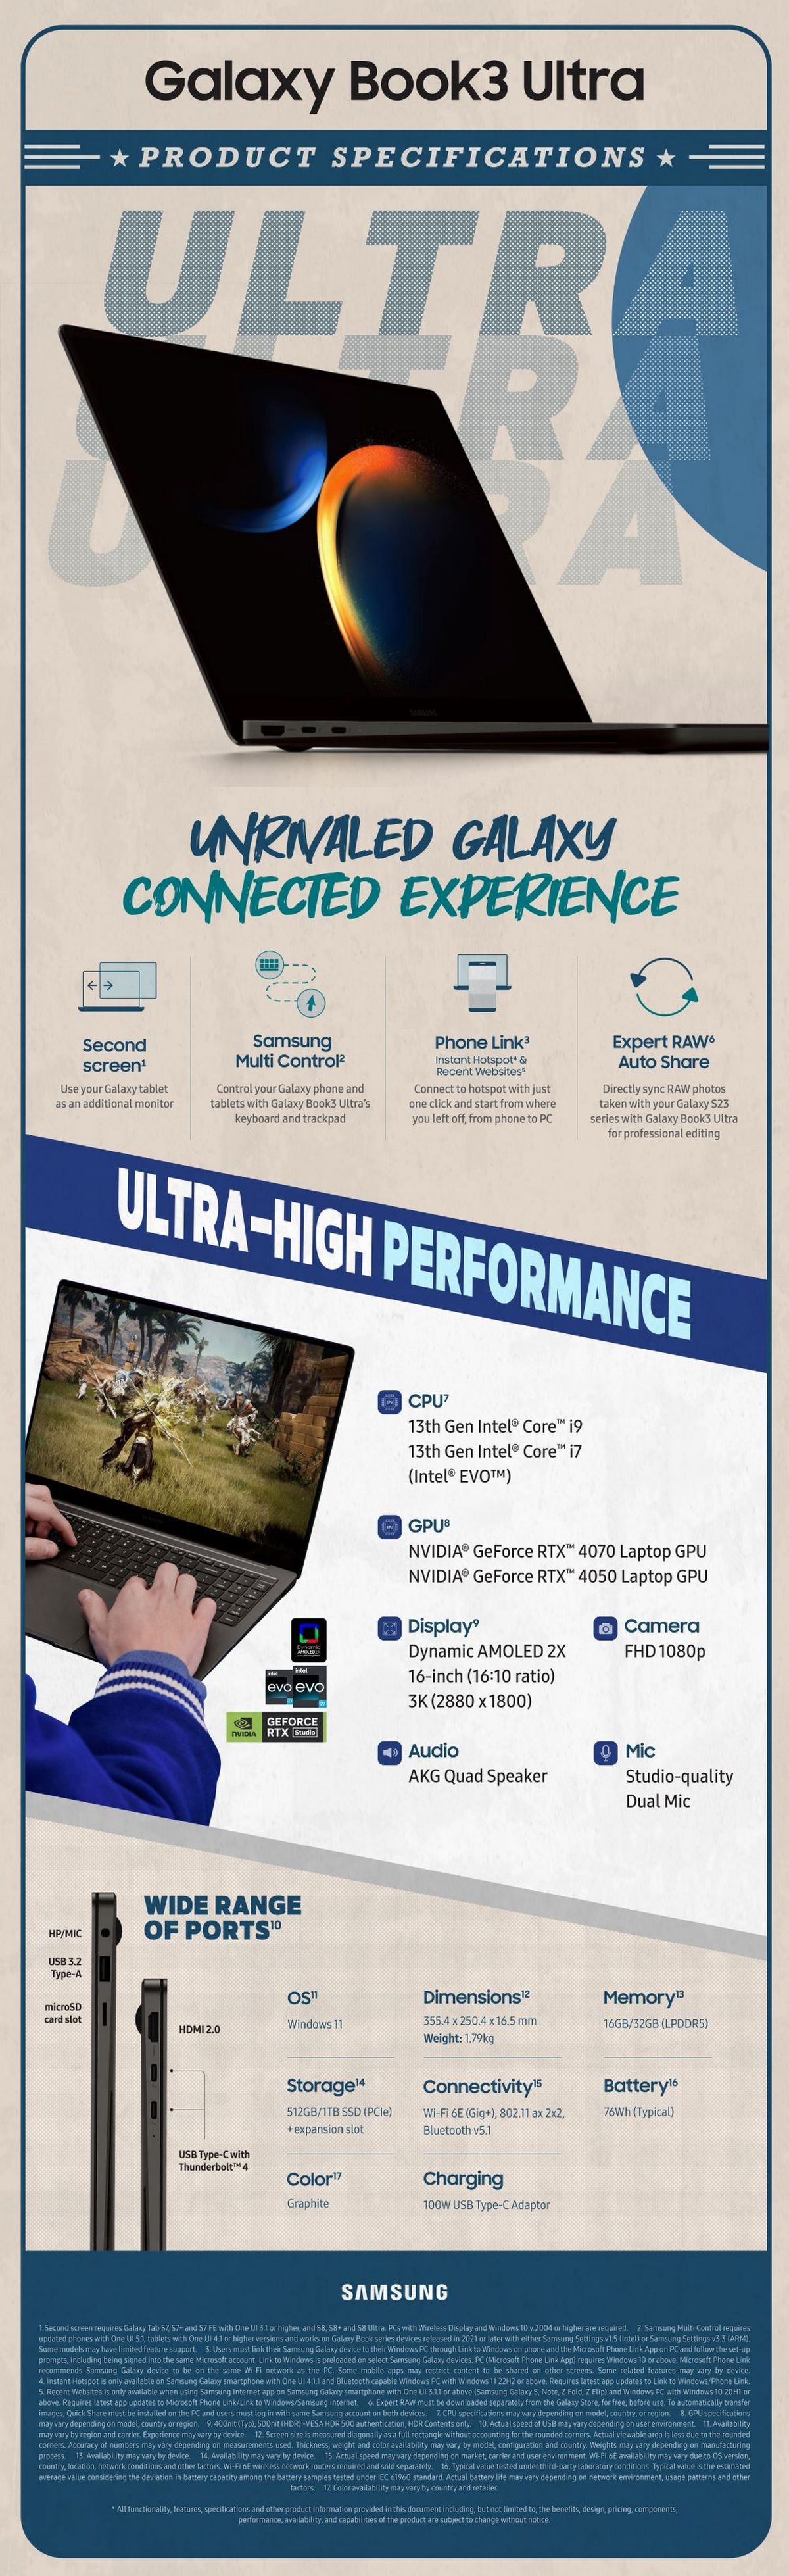 Here are Samsung's official infographics for the Galaxy S23 phones and Book3 laptops